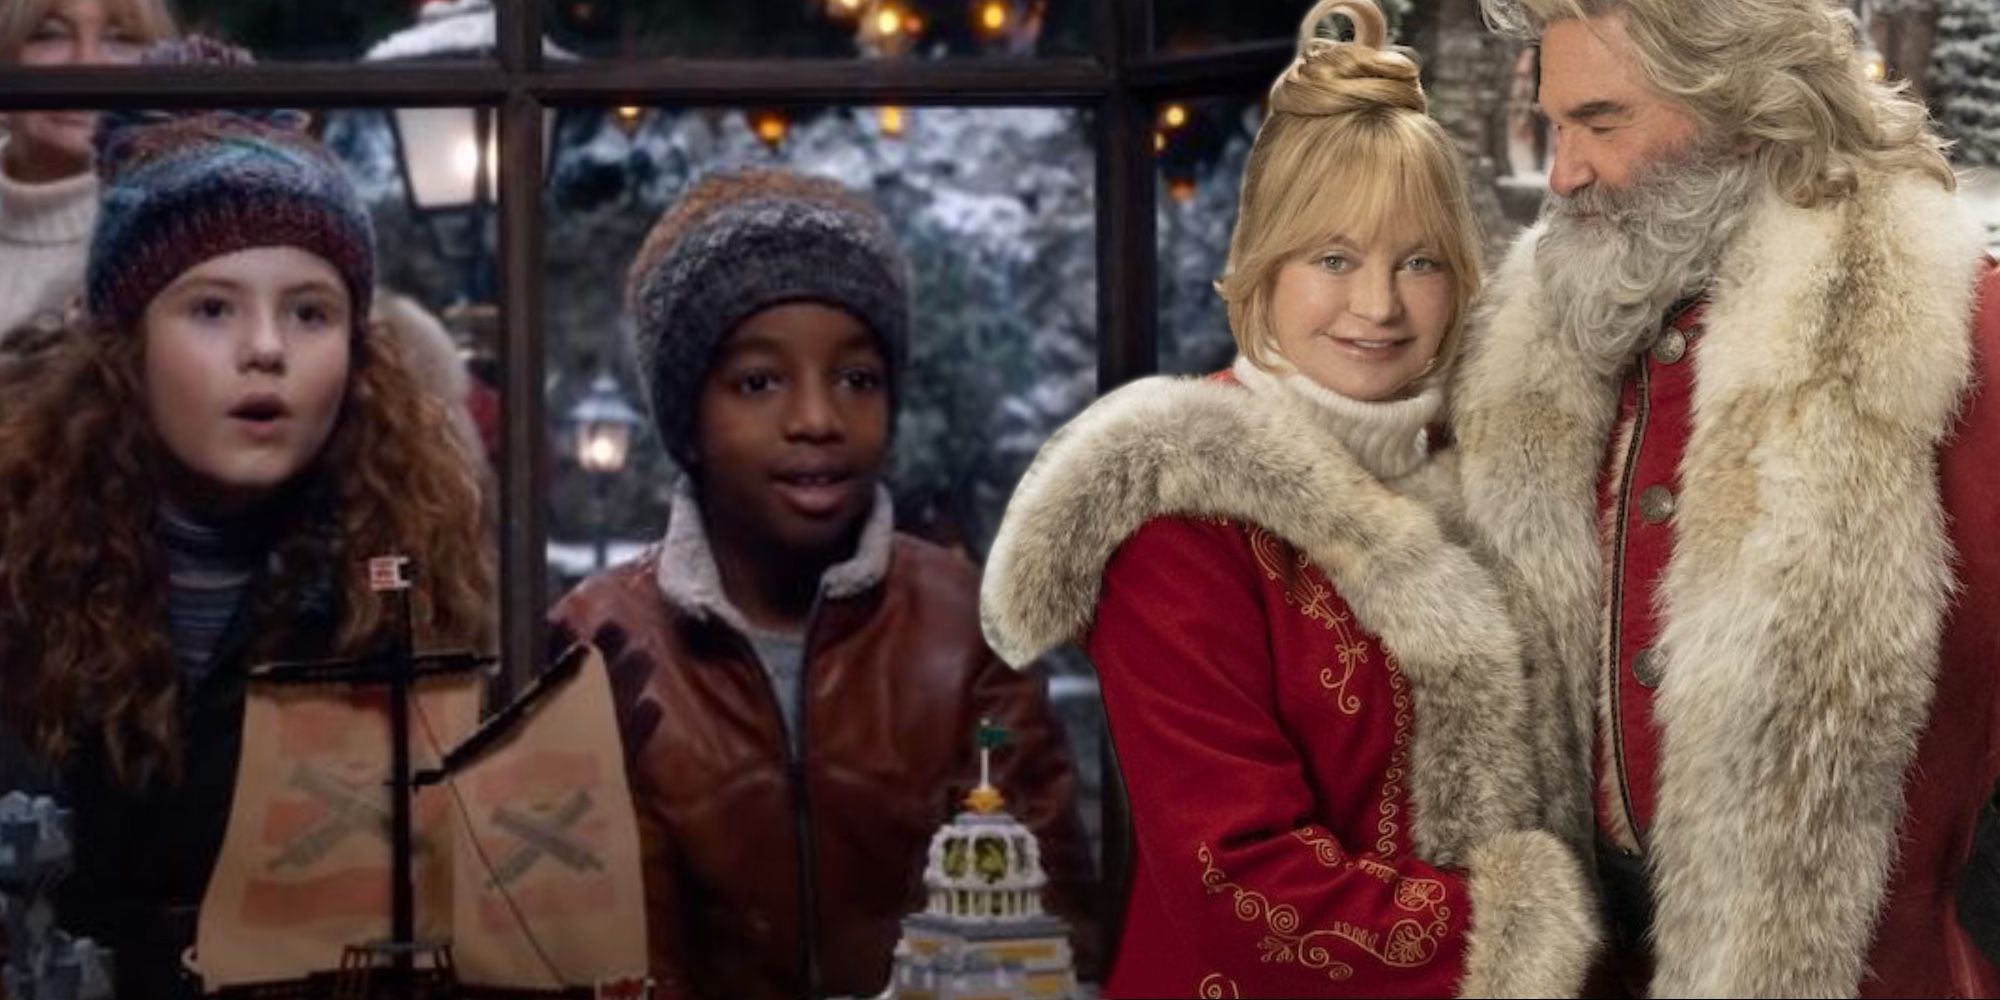 The Christmas Chronicles 2 How Old Are The Kids Supposed To Be